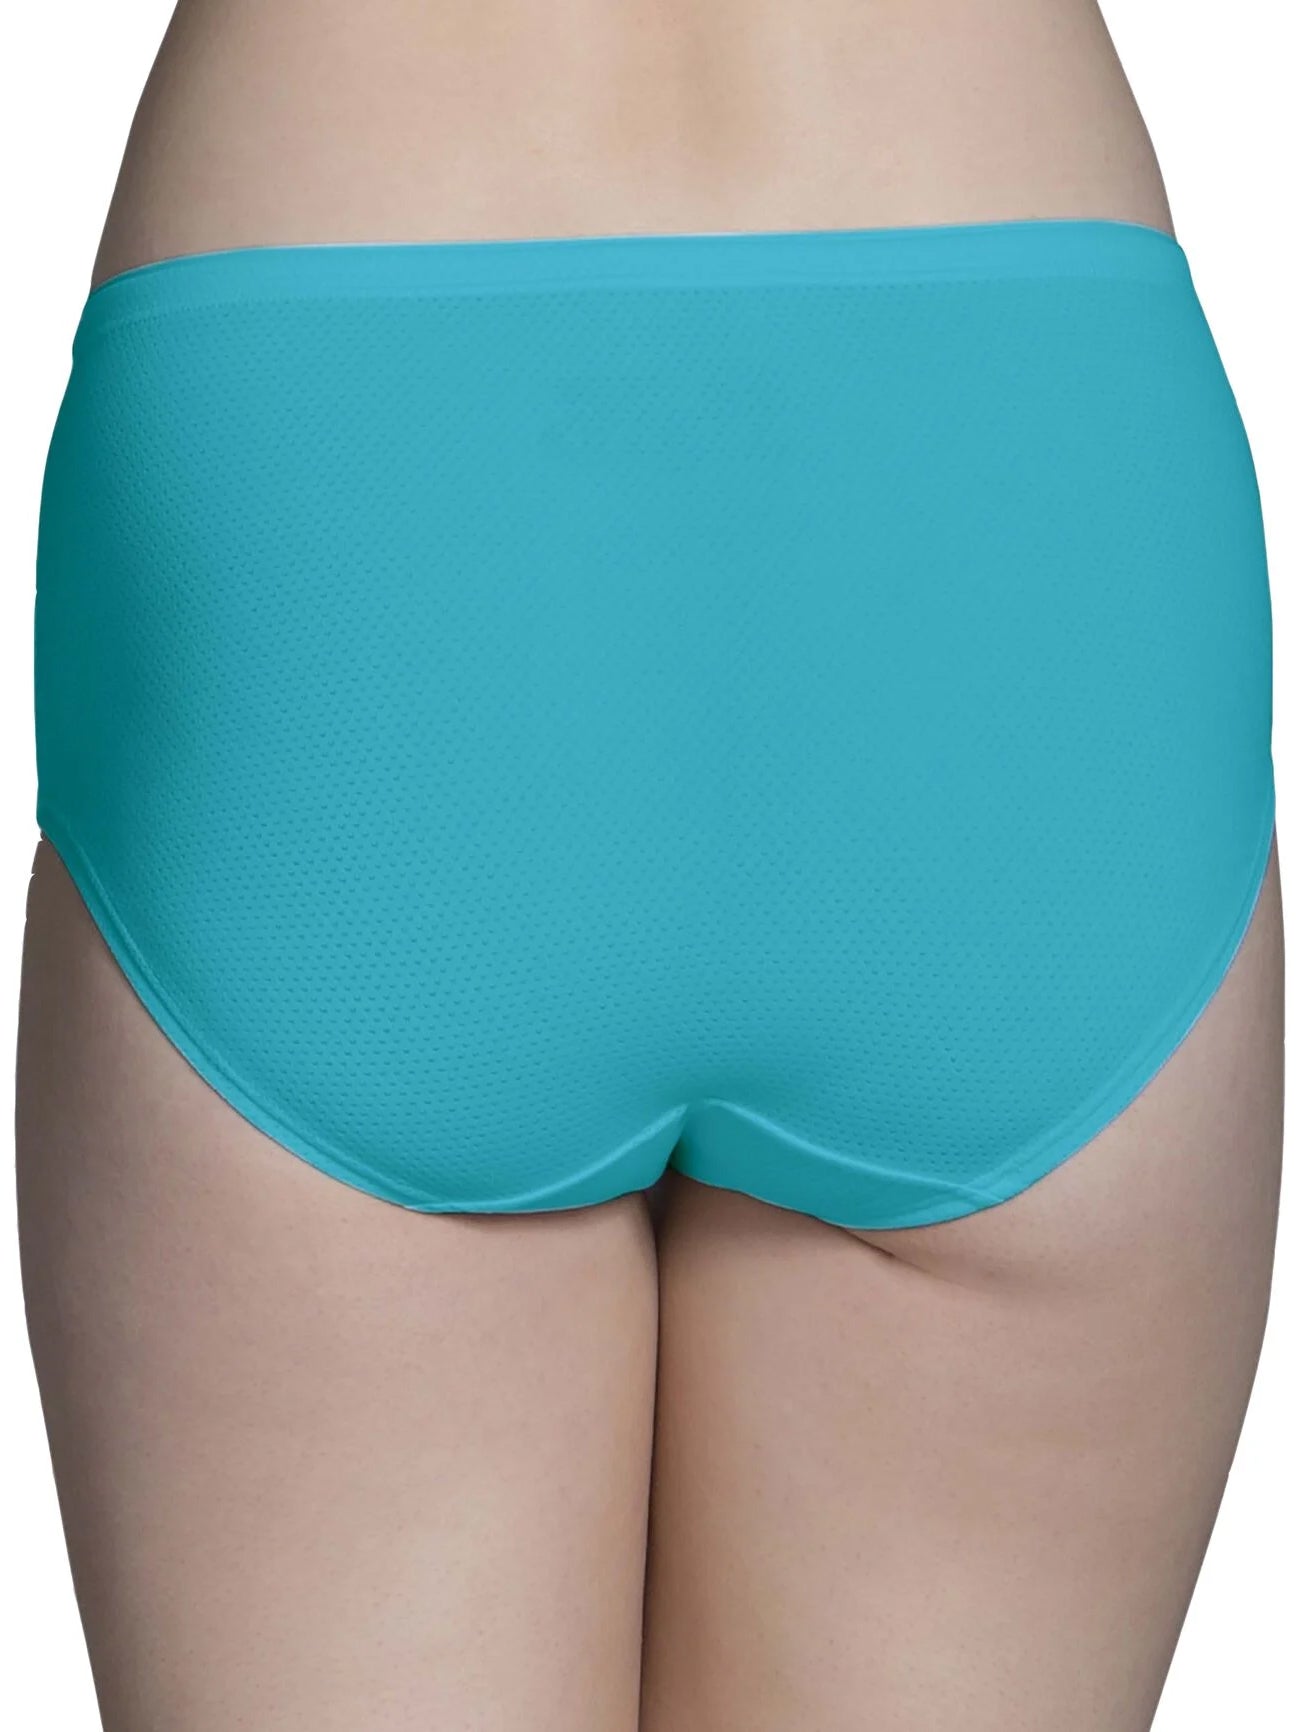 Fruit of the Loom Women's Assorted Low-Rise Brief Underwear, 6